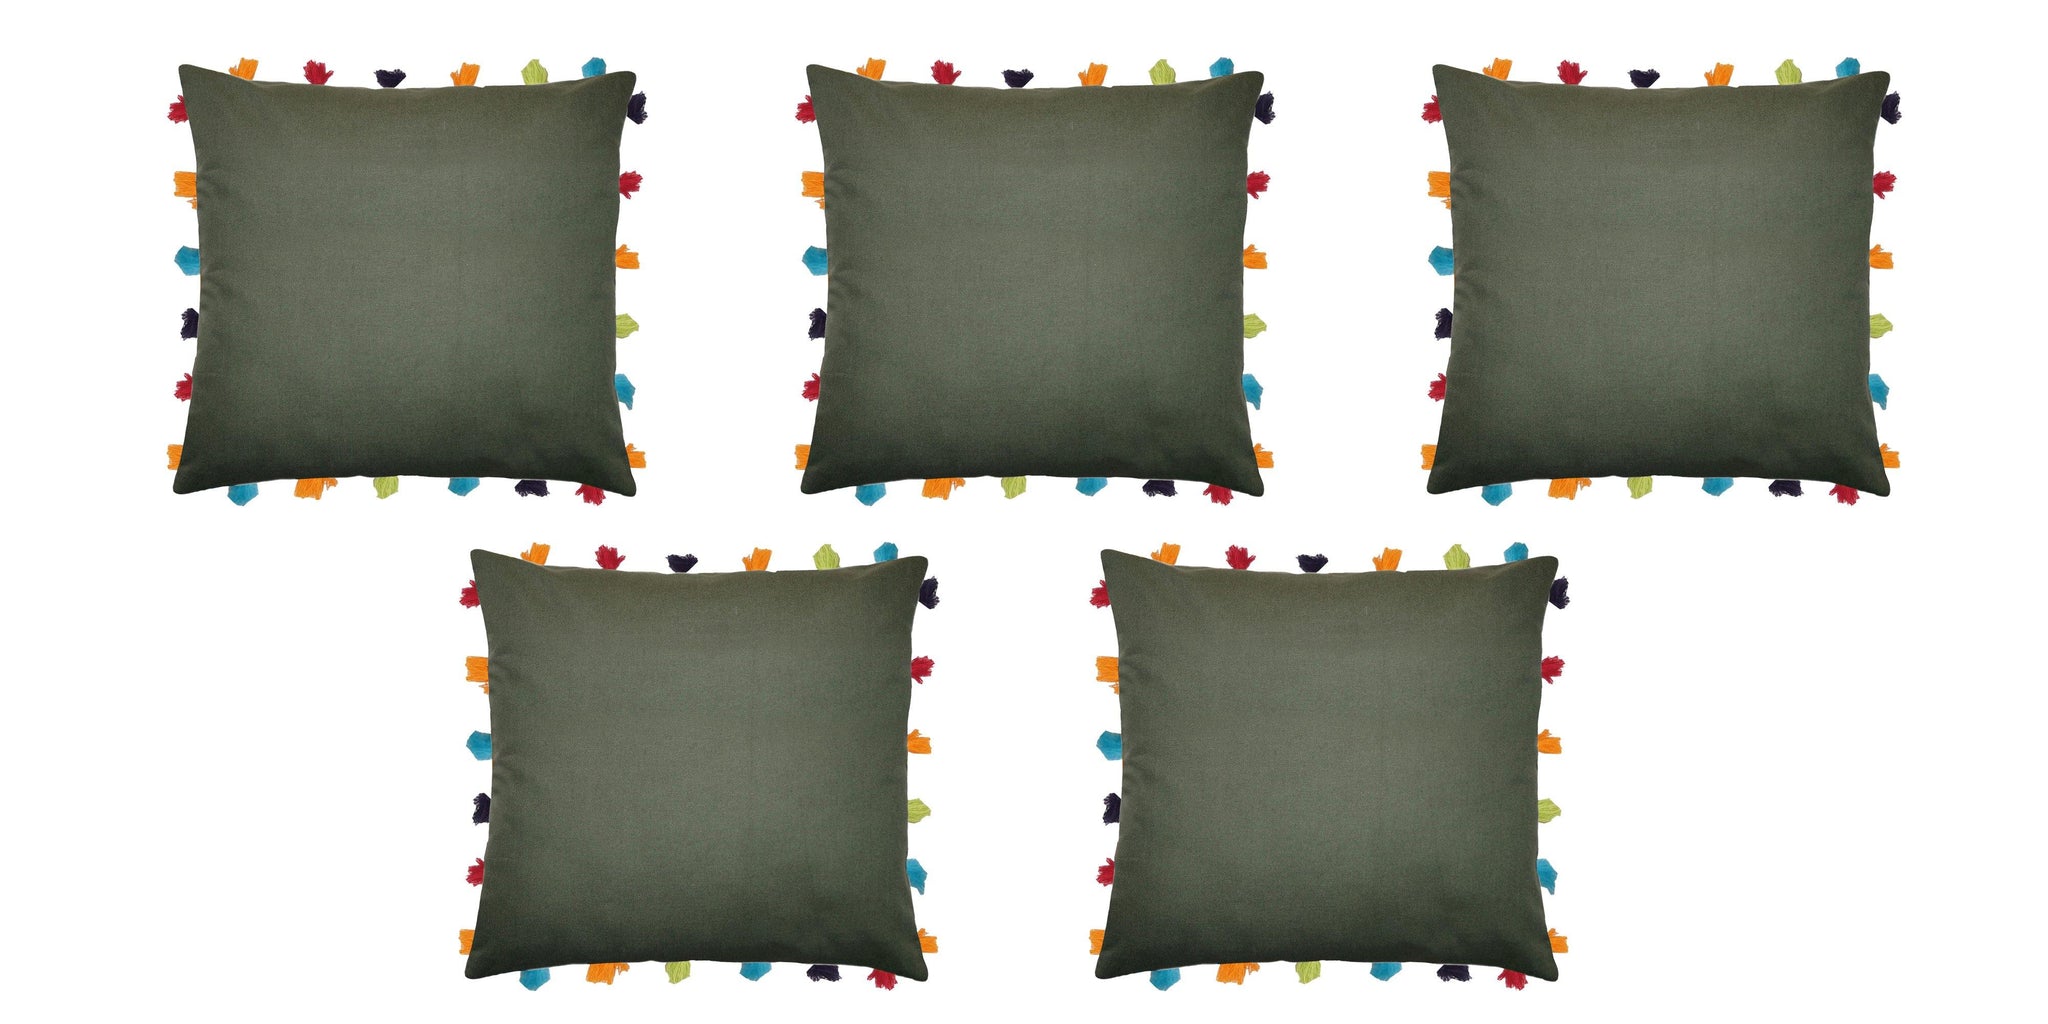 Lushomes Vineyard Green Cushion Cover with Colorful tassels (5 pcs, 18 x 18”) - Lushomes